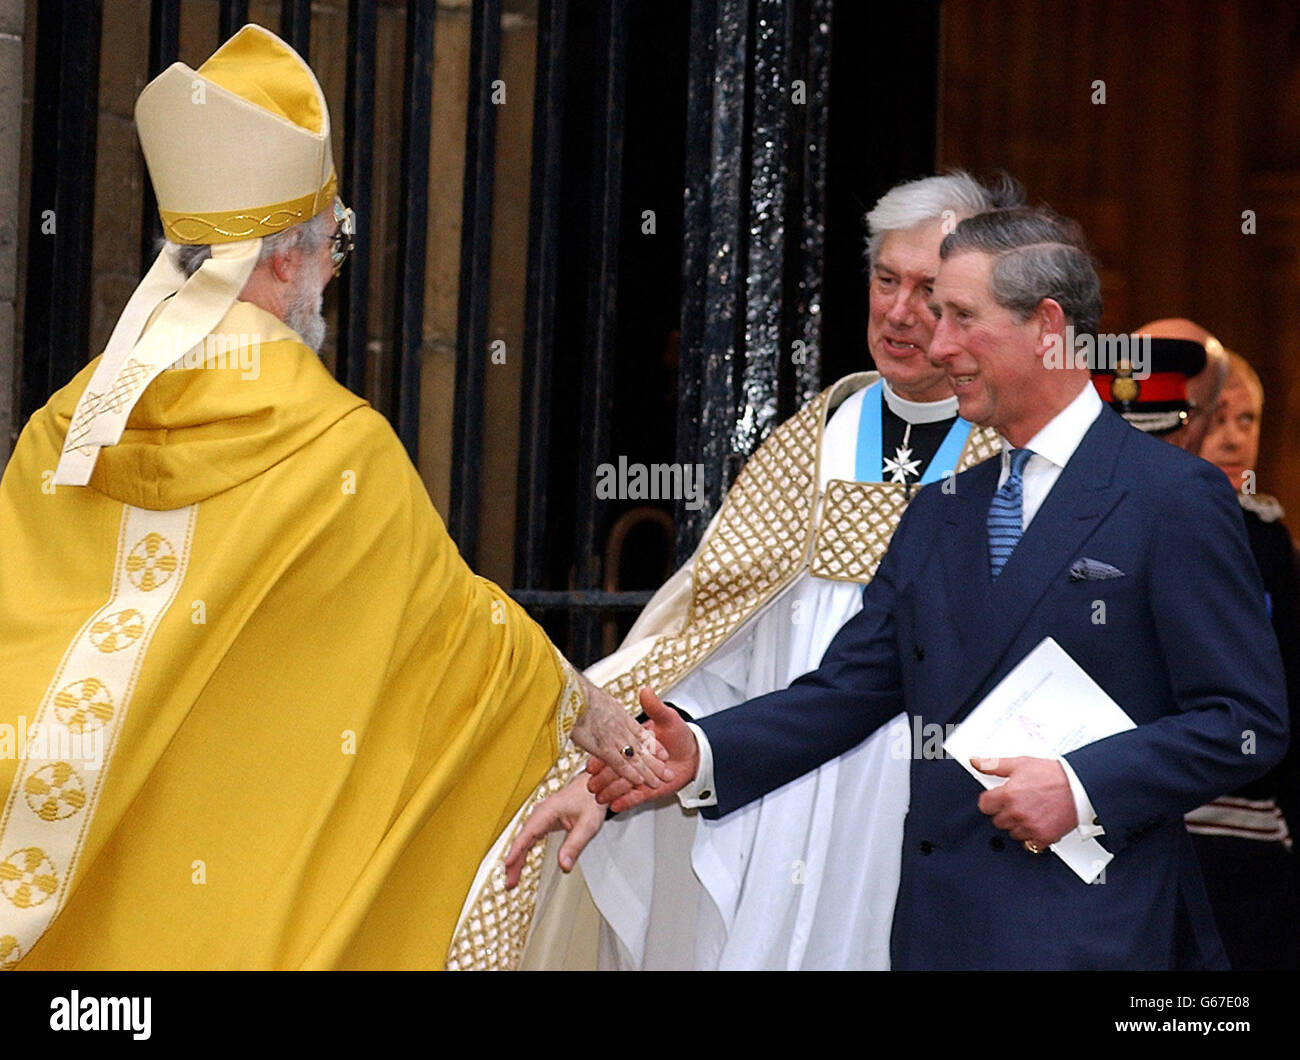 The Archbishop of Canterbury Dr Rowan Williams with The Prince of Wales, and the Dean of Canterbury Robert Willis, at the West door of Canterbury Cathedral after the Enthronement ceremony. Stock Photo